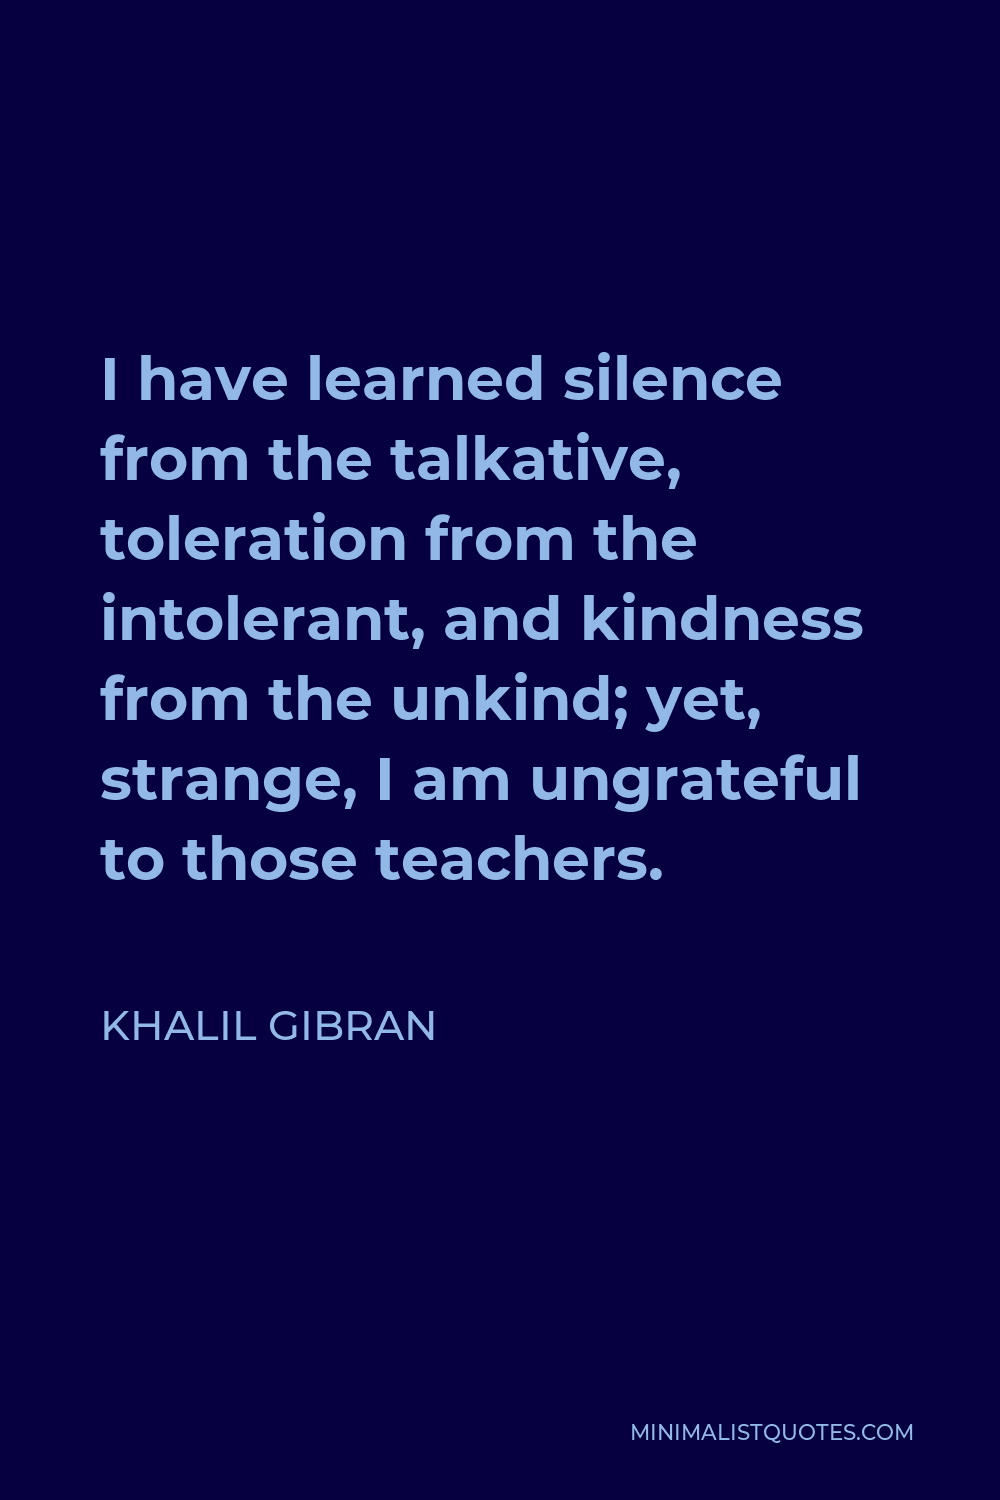 Khalil Gibran Quote - I have learned silence from the talkative, toleration from the intolerant, and kindness from the unkind; yet, strange, I am ungrateful to those teachers.